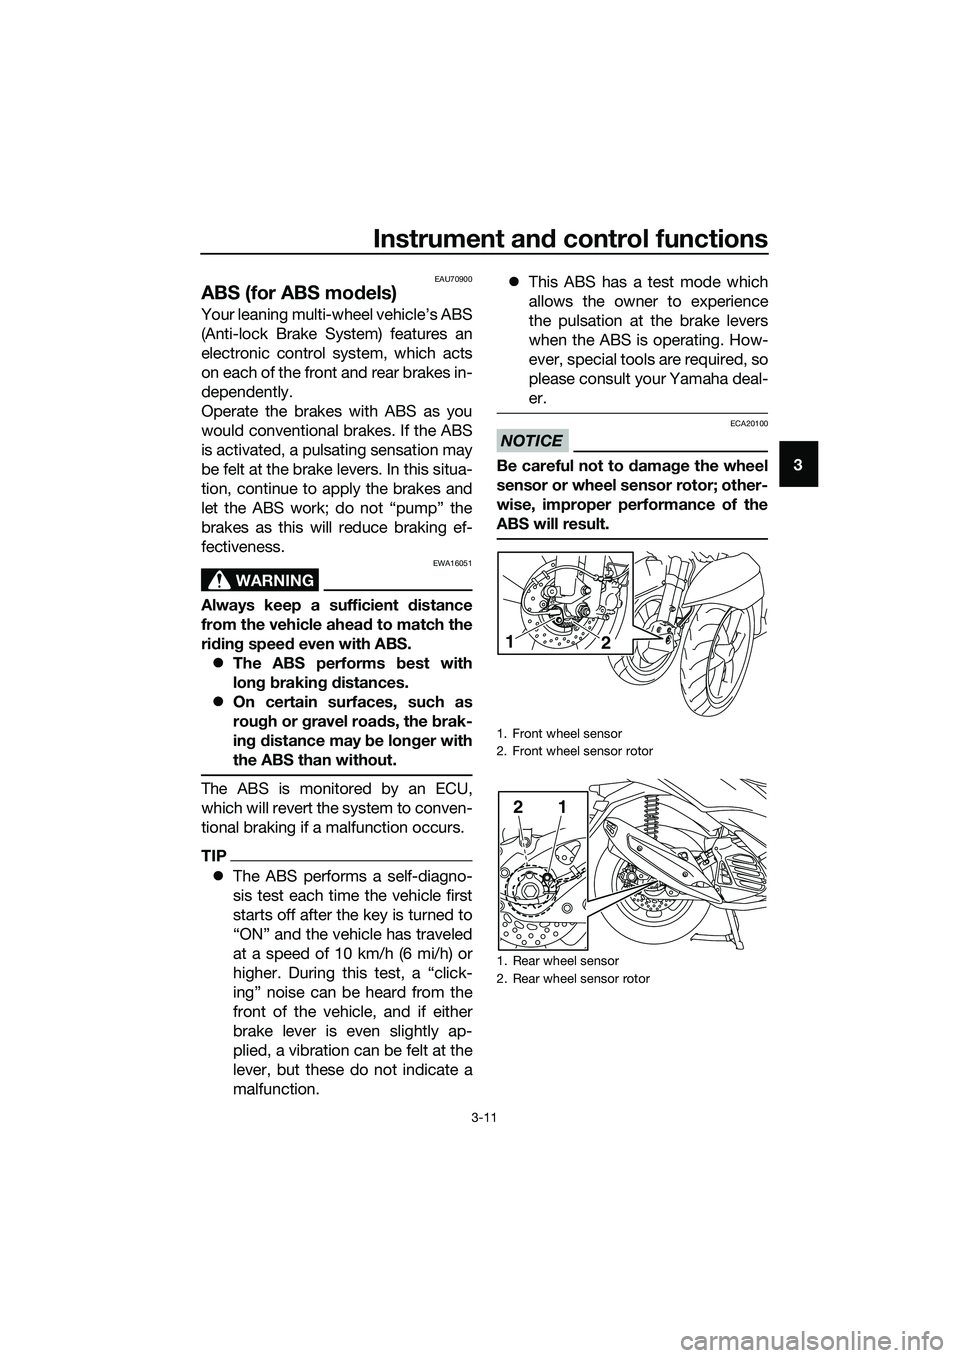 YAMAHA TRICITY 2017  Owners Manual Instrument and control functions
3-11
3
EAU70900
ABS (for ABS models)
Your leaning multi-wheel vehicle’s ABS
(Anti-lock Brake System) features an
electronic control system, which acts
on each of the